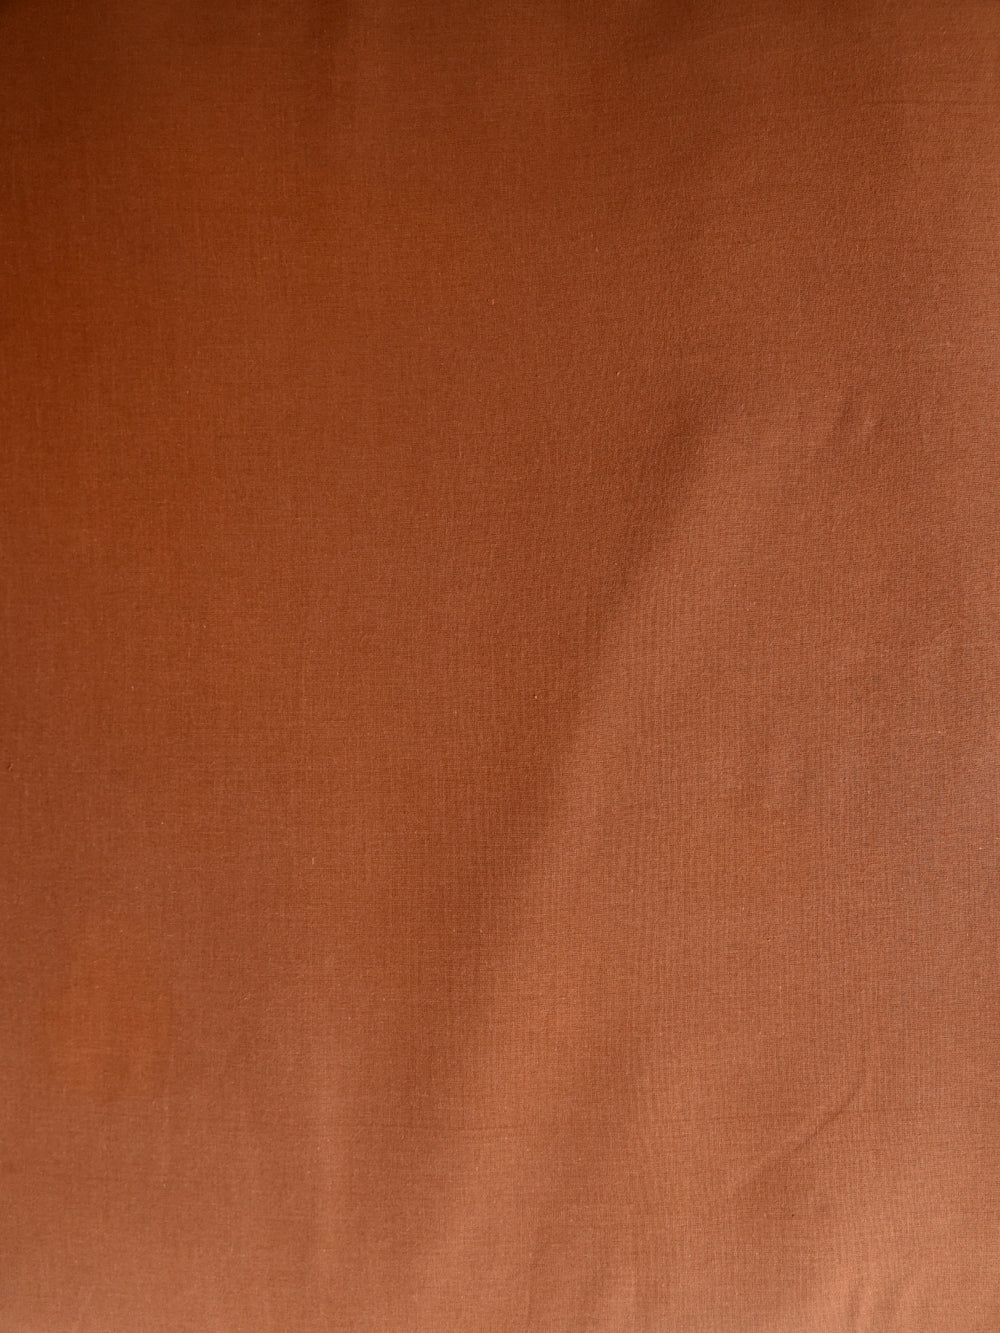 C-15 Light Brown Shade Solid Dyed Cotton Cambric Fabric